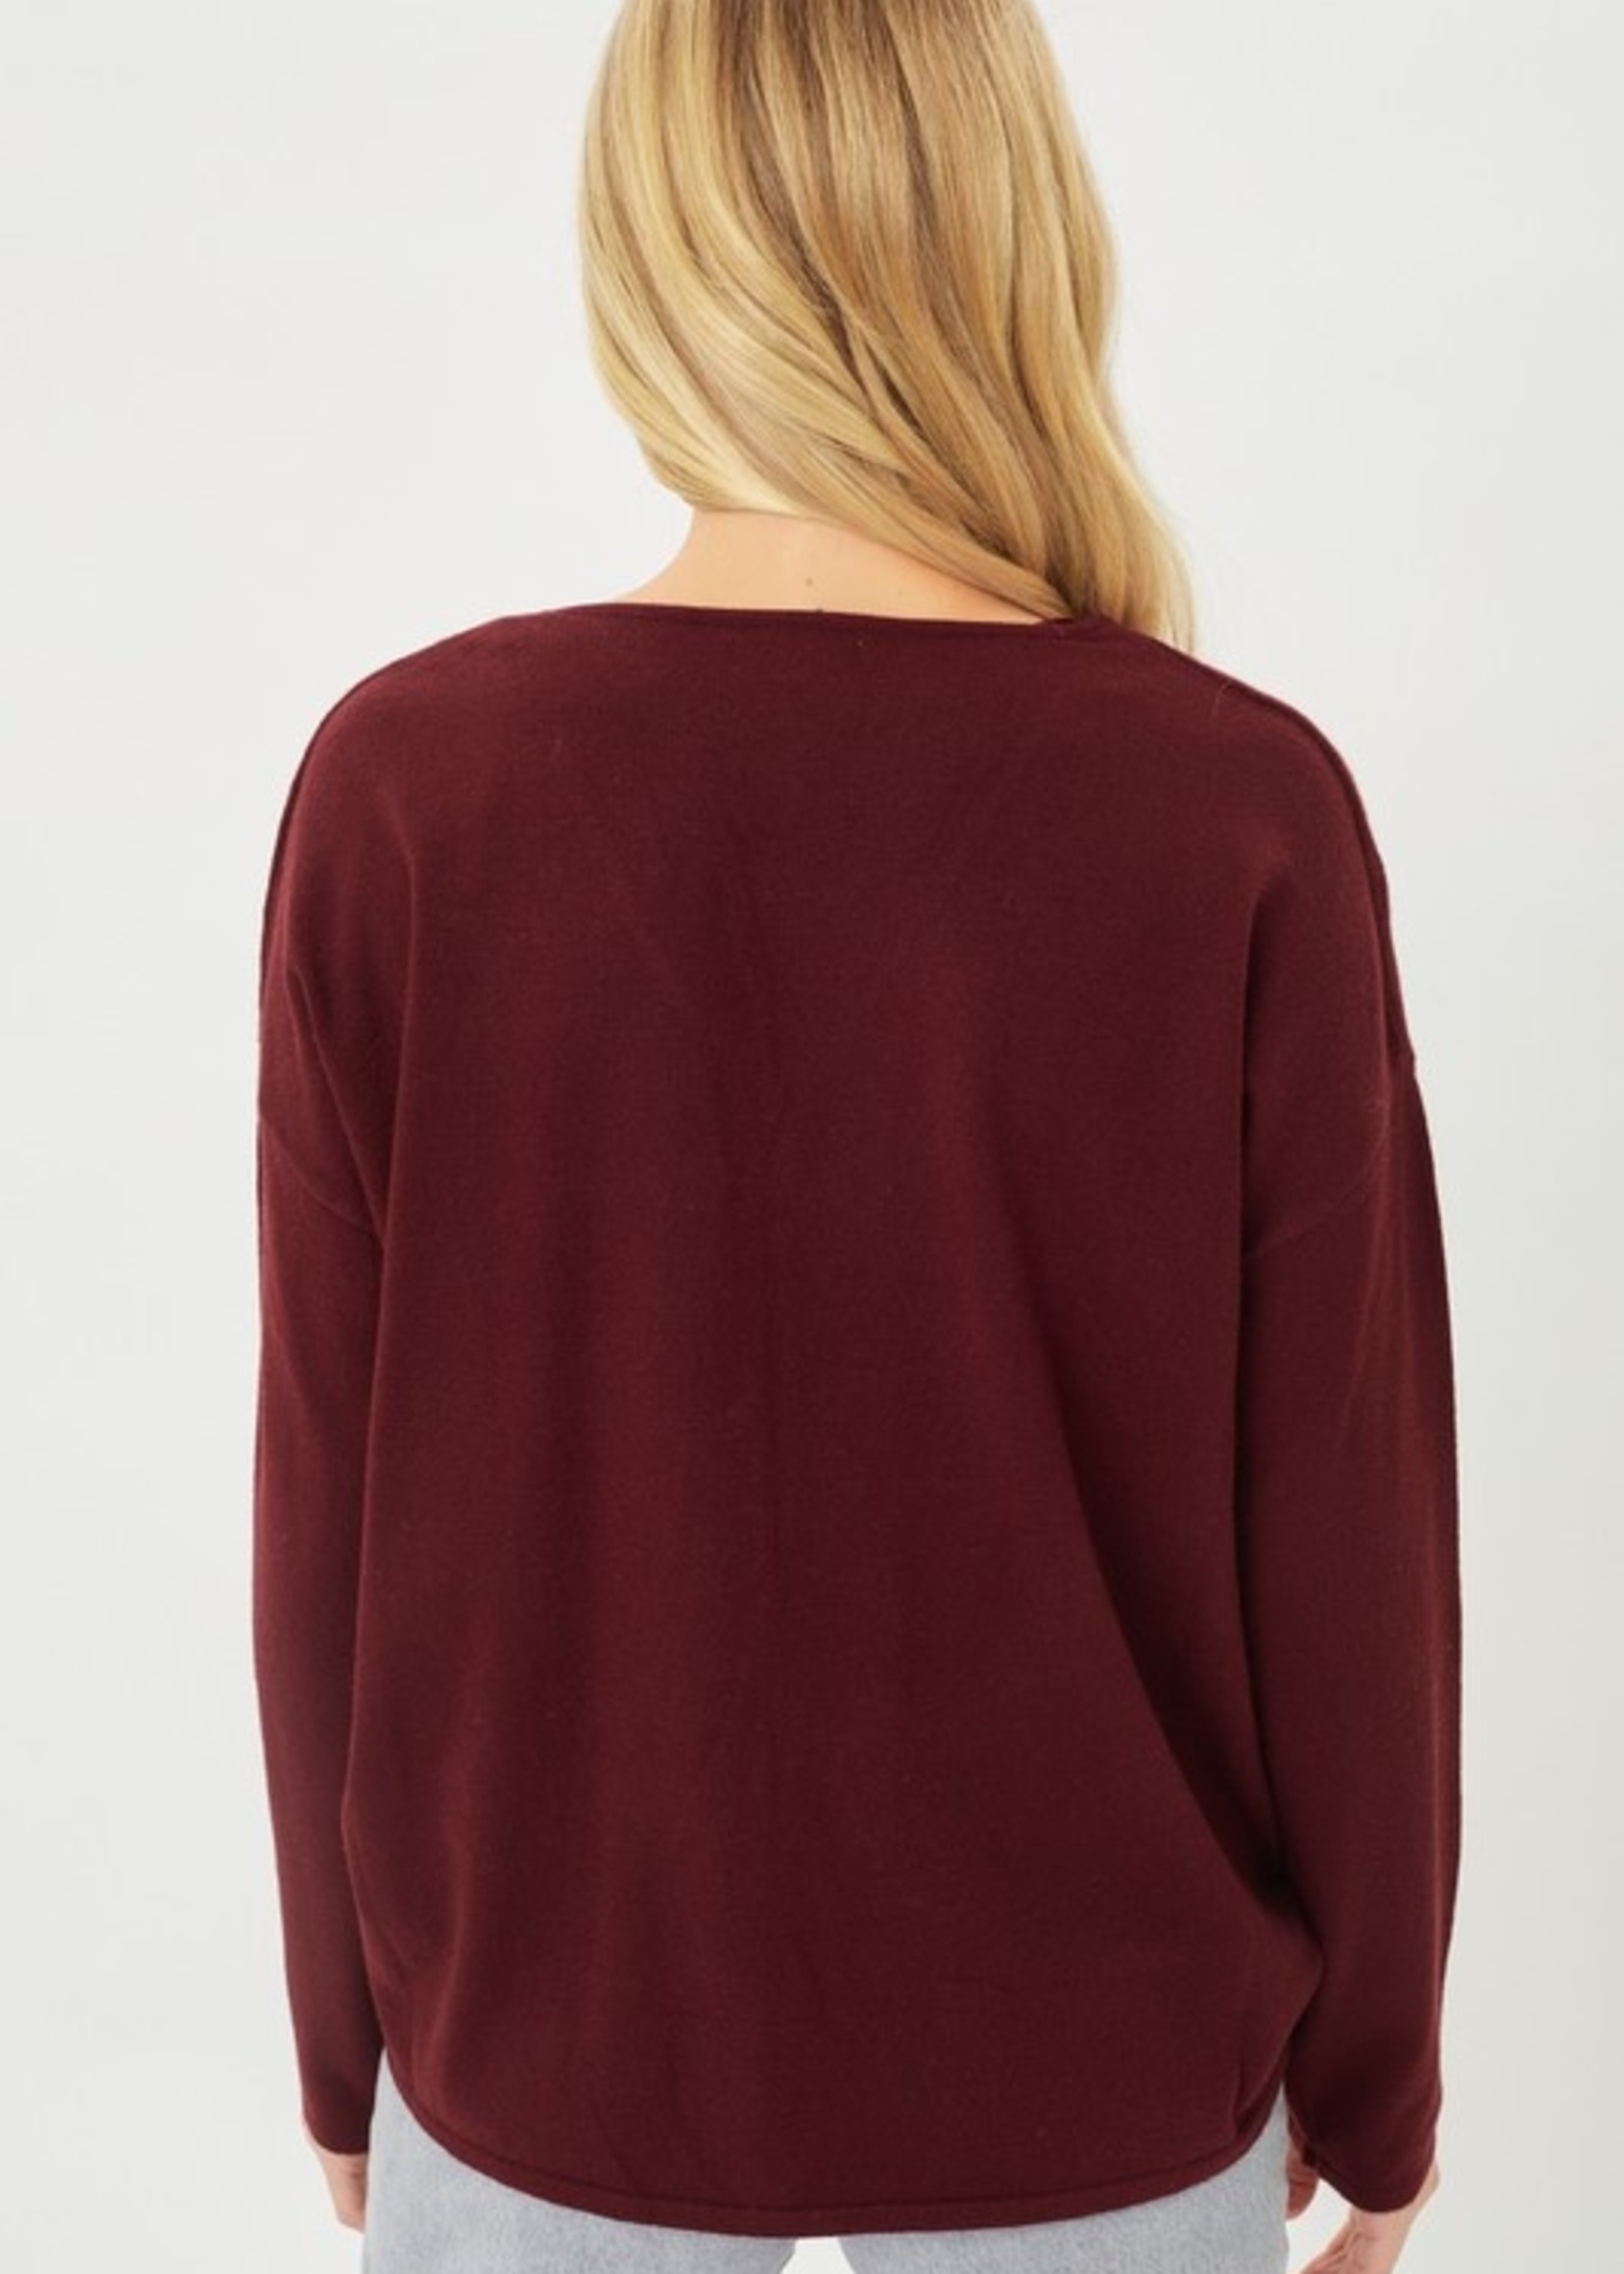 Ruched sweater 2 colors